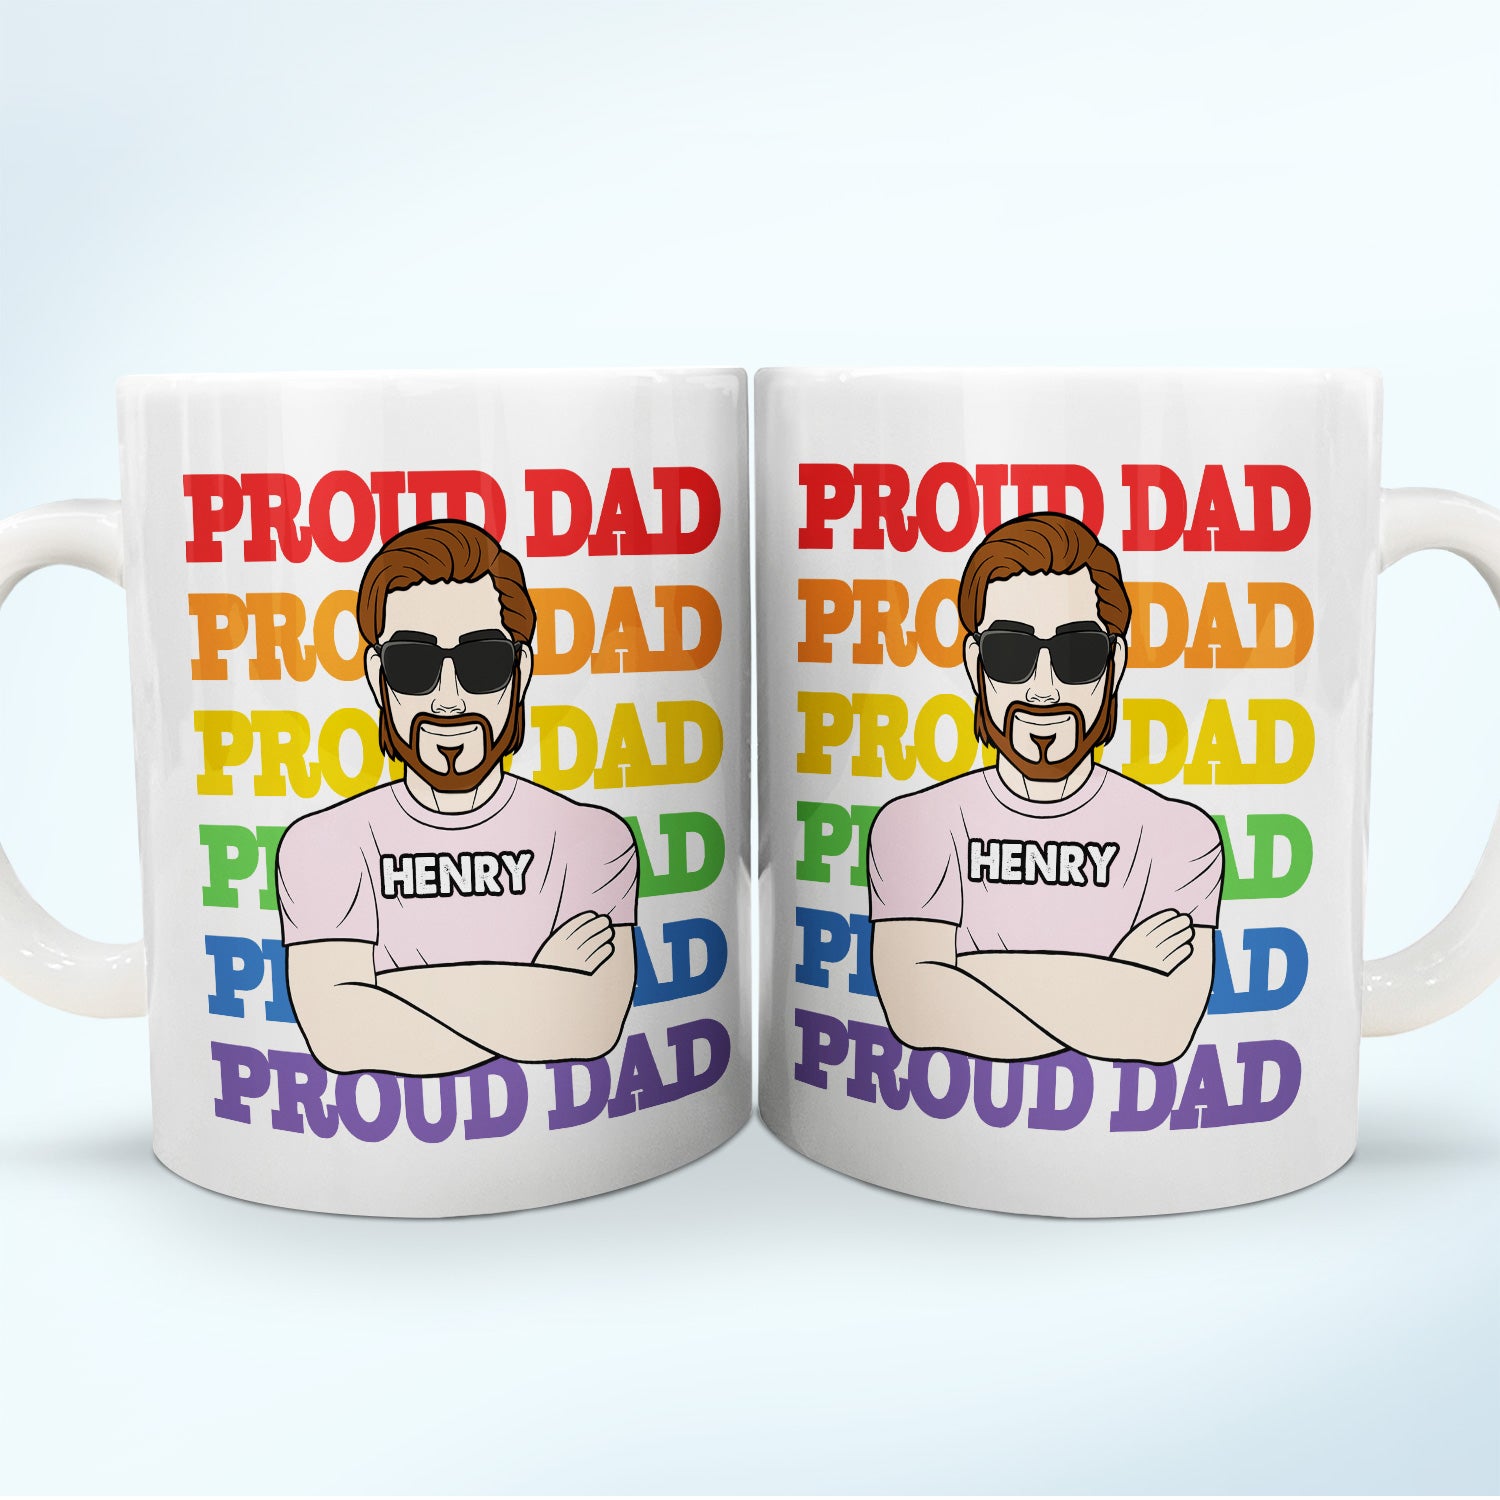 Proud Dad - Funny Gift For Pride Dad, Father, Grandpa - Personalized White Edge-to-Edge Mug